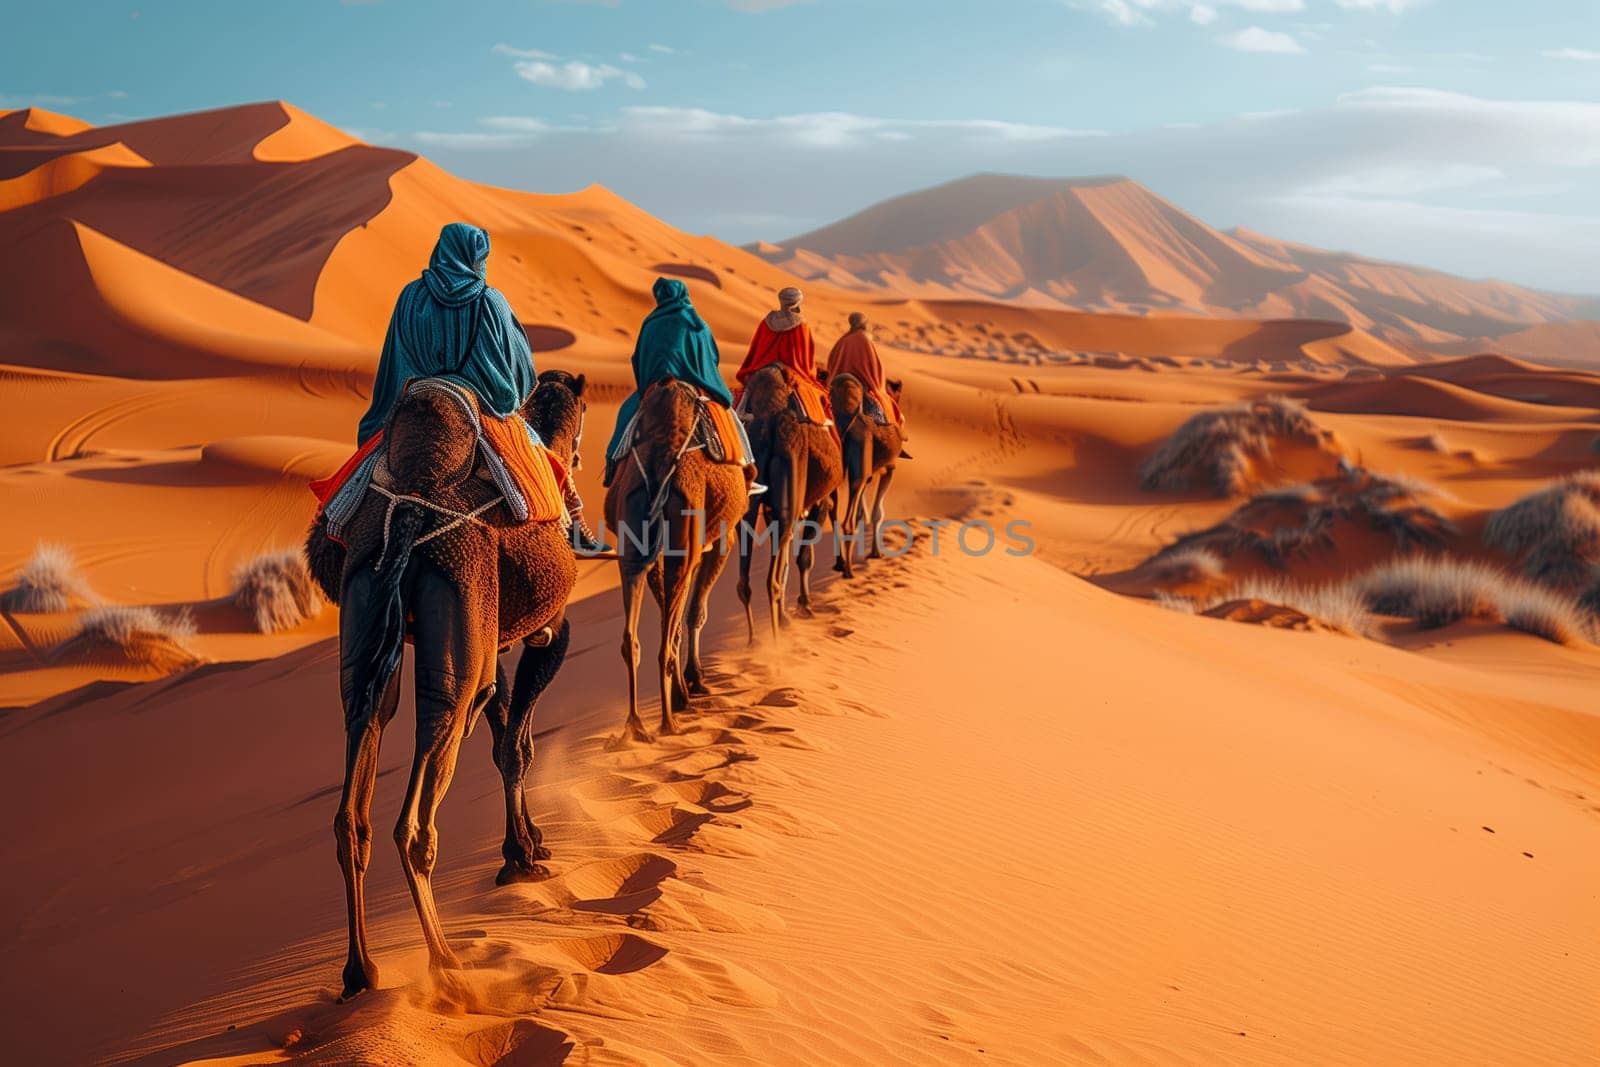 A group of travelers is journeying through the desert landscape on camels, with the vast sky above and rugged mountains in the distance